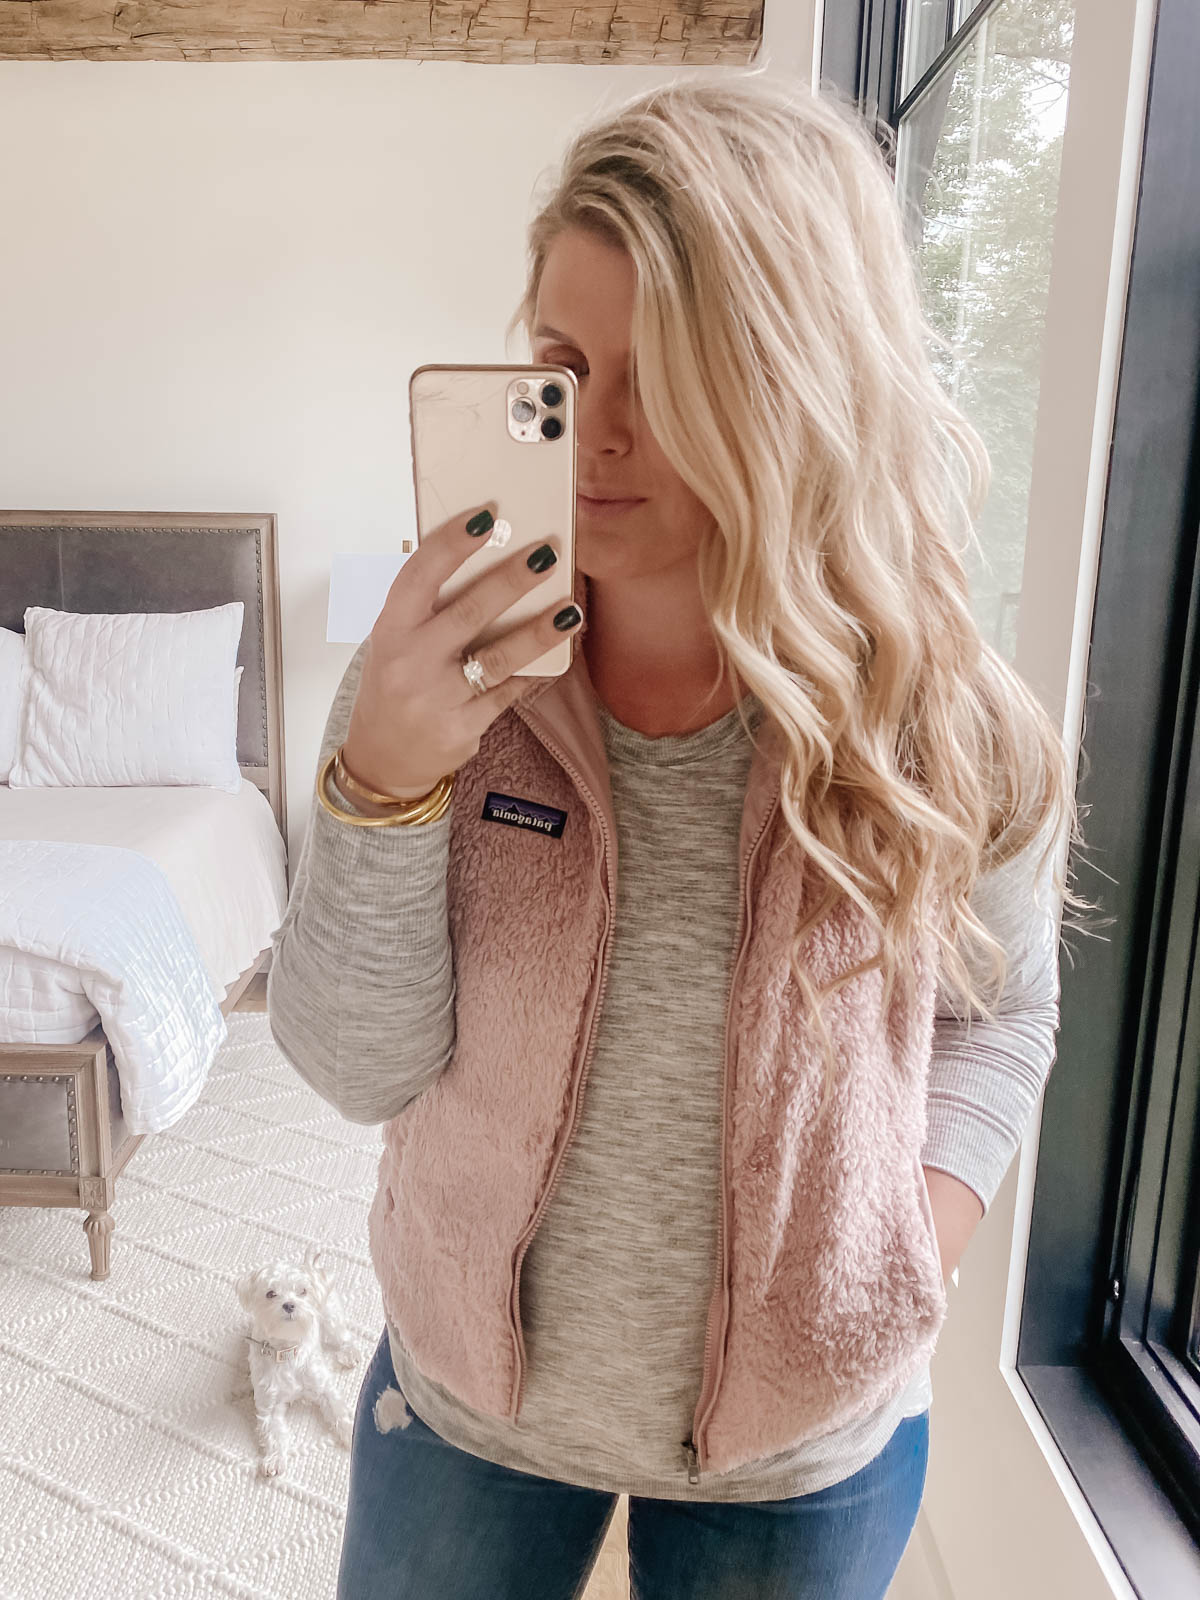 Cristin Cooper in Fall Casual Style featuring Alo Yoga Sweatshirt and Patagonia vest